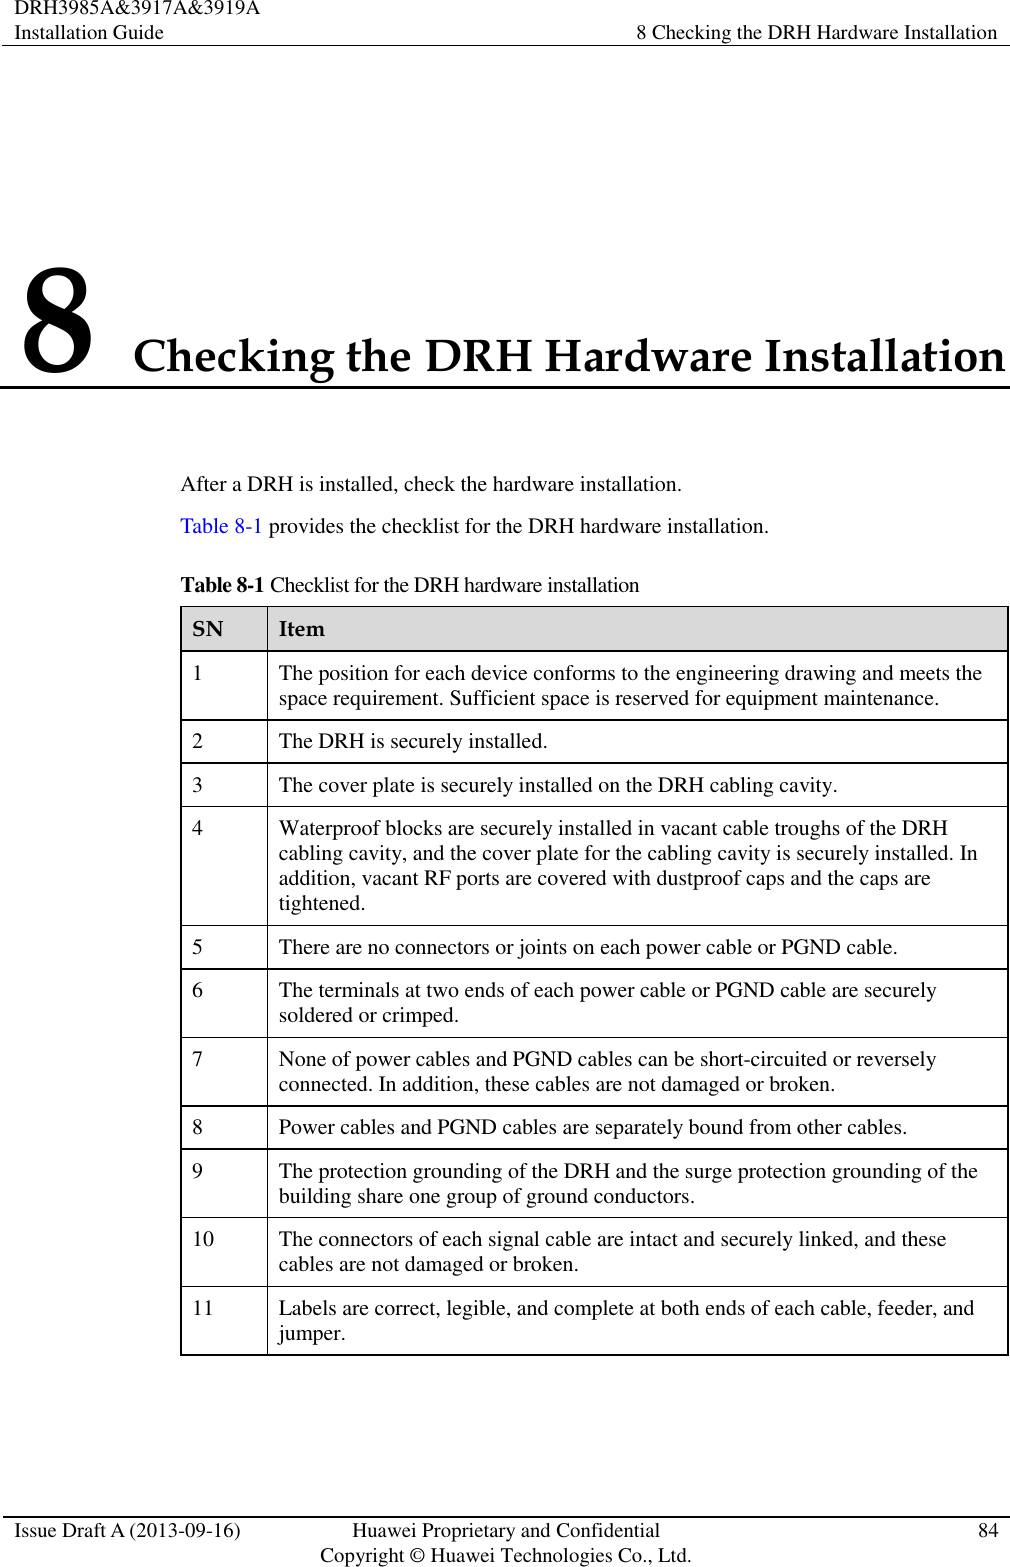 DRH3985A&amp;3917A&amp;3919A Installation Guide 8 Checking the DRH Hardware Installation  Issue Draft A (2013-09-16) Huawei Proprietary and Confidential                                     Copyright © Huawei Technologies Co., Ltd. 84  8 Checking the DRH Hardware Installation After a DRH is installed, check the hardware installation.   Table 8-1 provides the checklist for the DRH hardware installation. Table 8-1 Checklist for the DRH hardware installation SN Item 1 The position for each device conforms to the engineering drawing and meets the space requirement. Sufficient space is reserved for equipment maintenance.   2 The DRH is securely installed. 3 The cover plate is securely installed on the DRH cabling cavity.   4 Waterproof blocks are securely installed in vacant cable troughs of the DRH cabling cavity, and the cover plate for the cabling cavity is securely installed. In addition, vacant RF ports are covered with dustproof caps and the caps are tightened. 5 There are no connectors or joints on each power cable or PGND cable.   6 The terminals at two ends of each power cable or PGND cable are securely soldered or crimped. 7 None of power cables and PGND cables can be short-circuited or reversely connected. In addition, these cables are not damaged or broken. 8 Power cables and PGND cables are separately bound from other cables.   9 The protection grounding of the DRH and the surge protection grounding of the building share one group of ground conductors. 10 The connectors of each signal cable are intact and securely linked, and these cables are not damaged or broken. 11 Labels are correct, legible, and complete at both ends of each cable, feeder, and jumper. 